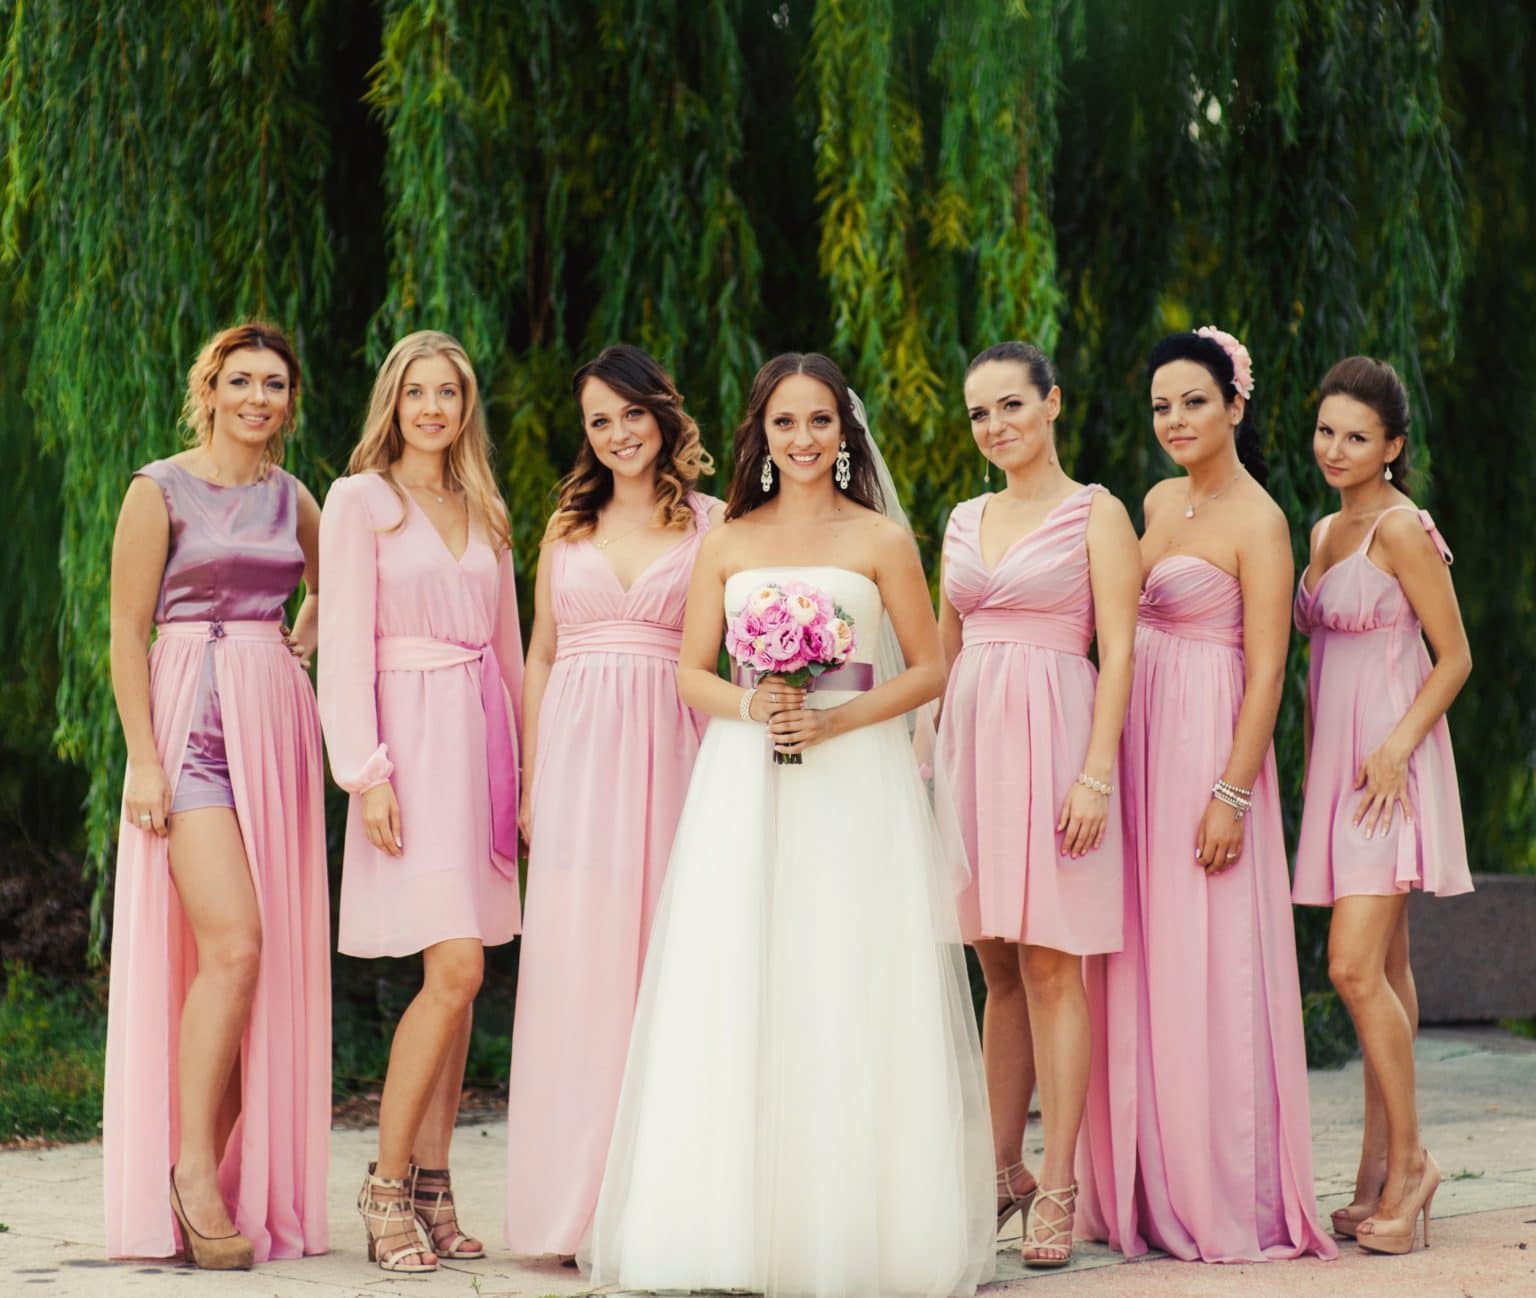 To Match or Not to Match Bridesmaid Dresses - That Is the Question ...